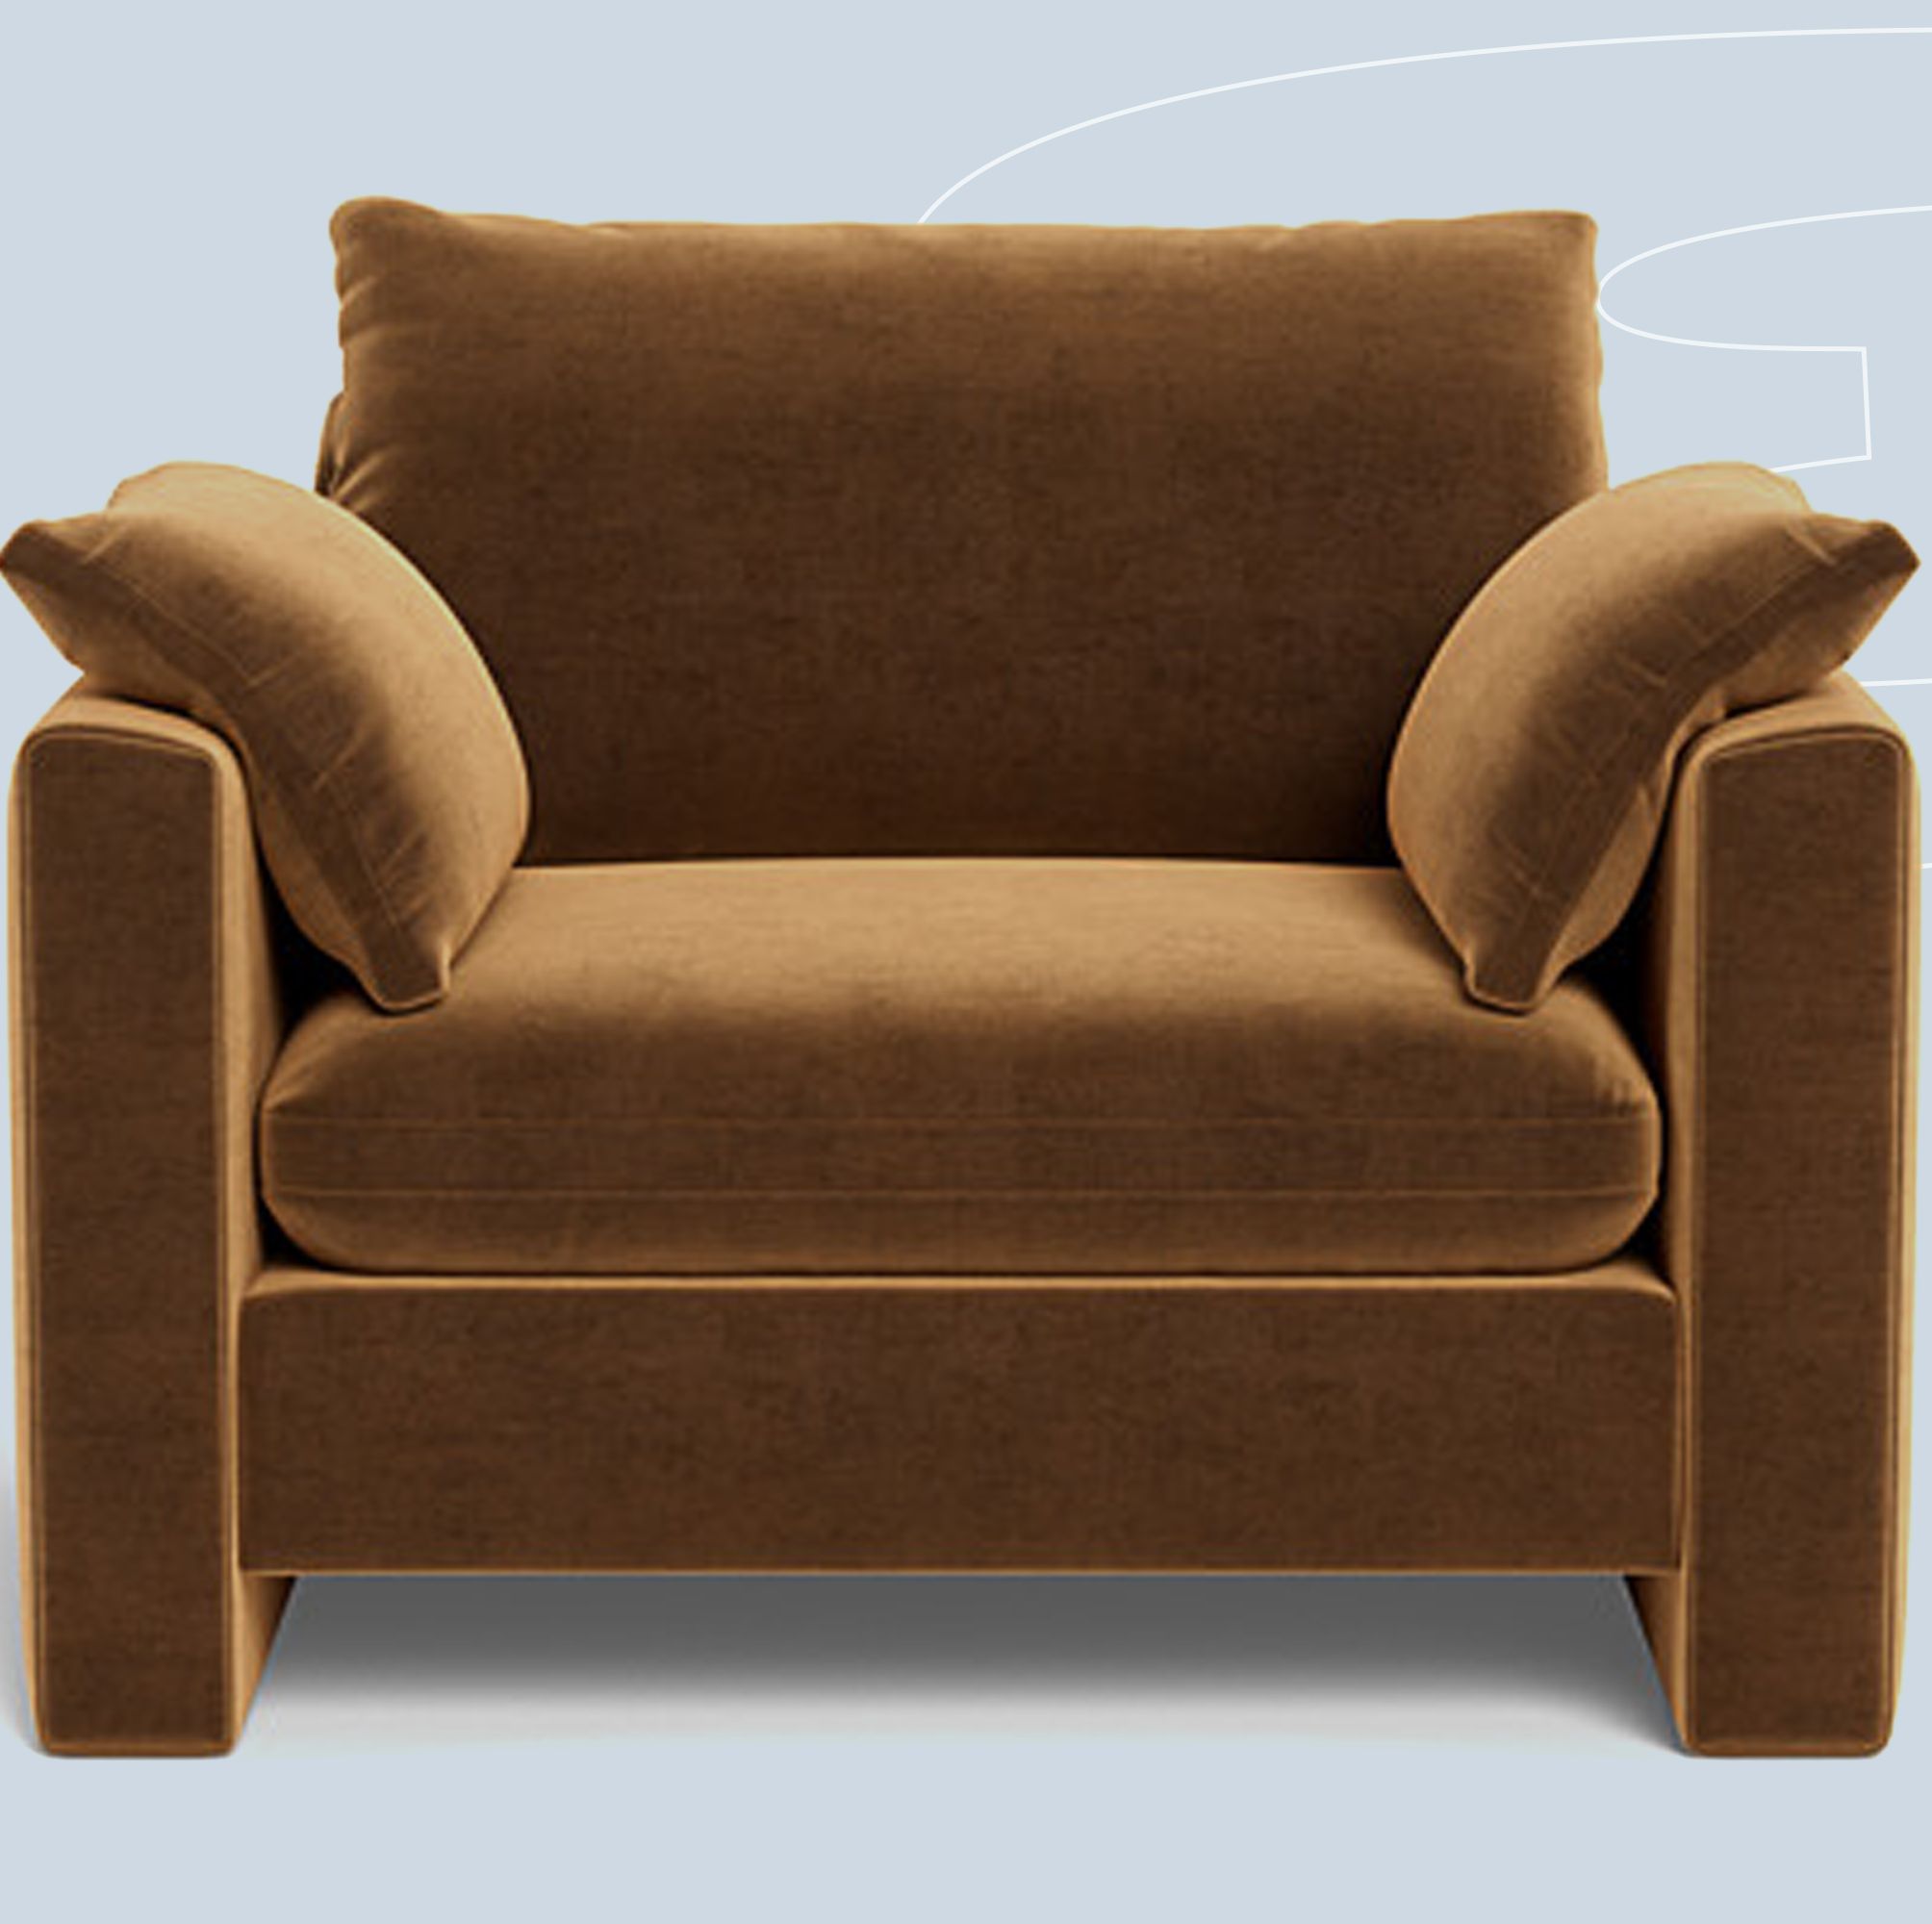 The 15 Comfiest Chairs for Lounging All Over the Place